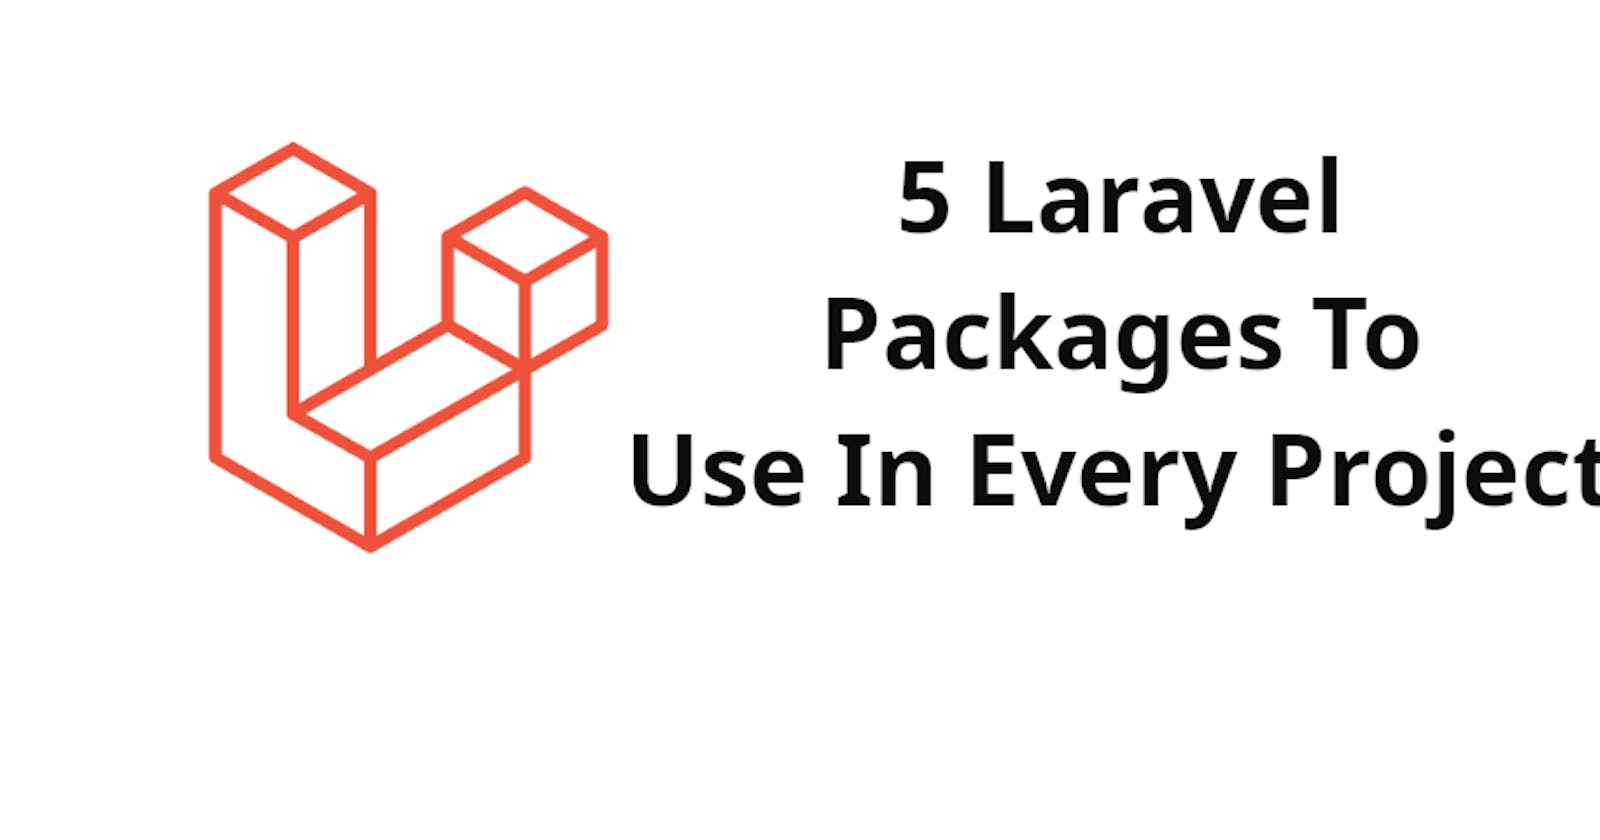 5 Laravel Packages To Use In Every Project